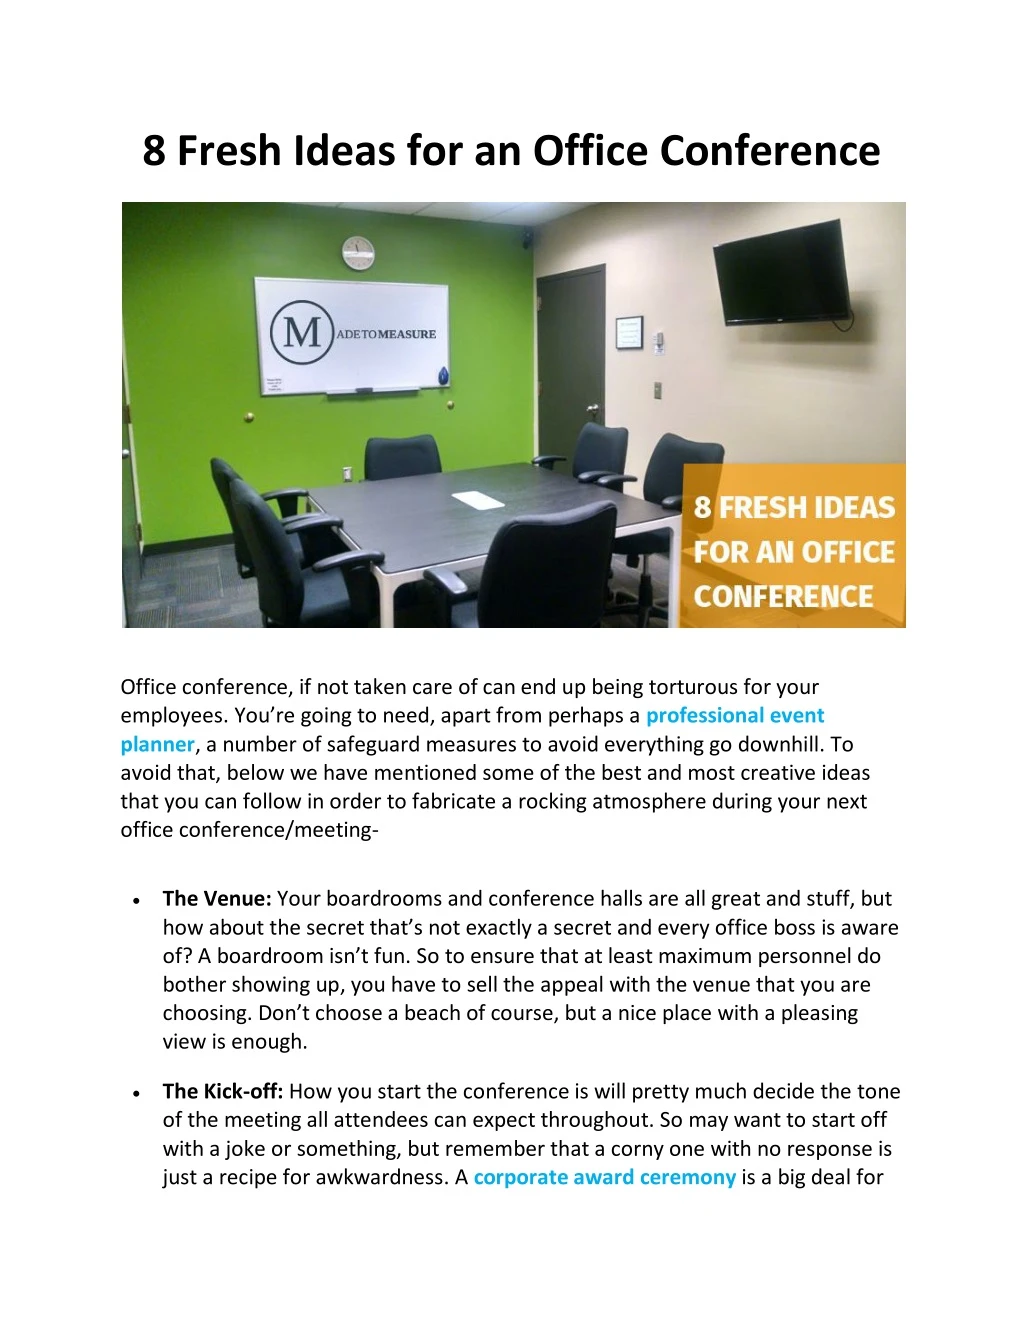 8 fresh ideas for an office conference